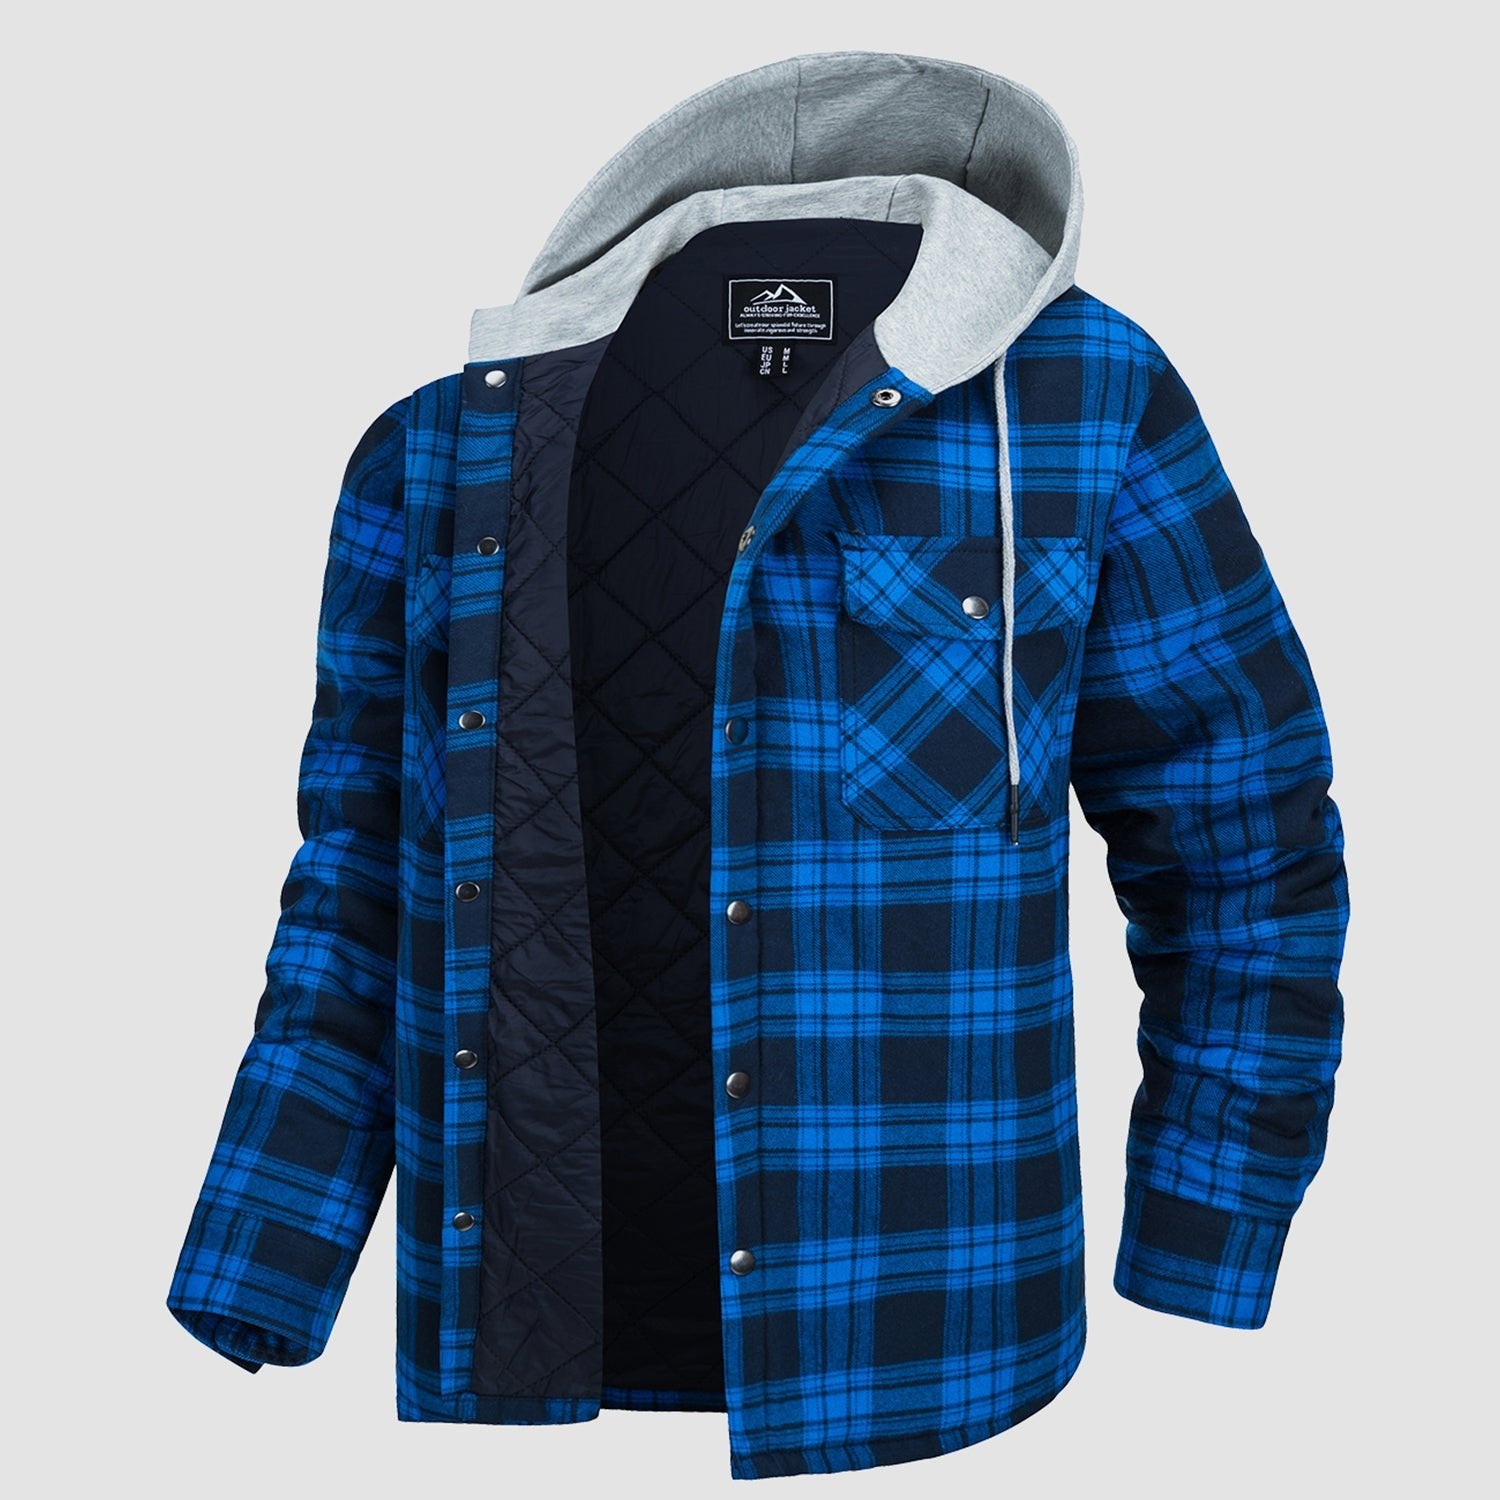 MAGCOMSEN Men's Flannel Jacket with Removable Hood 5 Pockets Quilted Plaid  Shirt Jackets Winter Coats Thick Flannel Hoodie